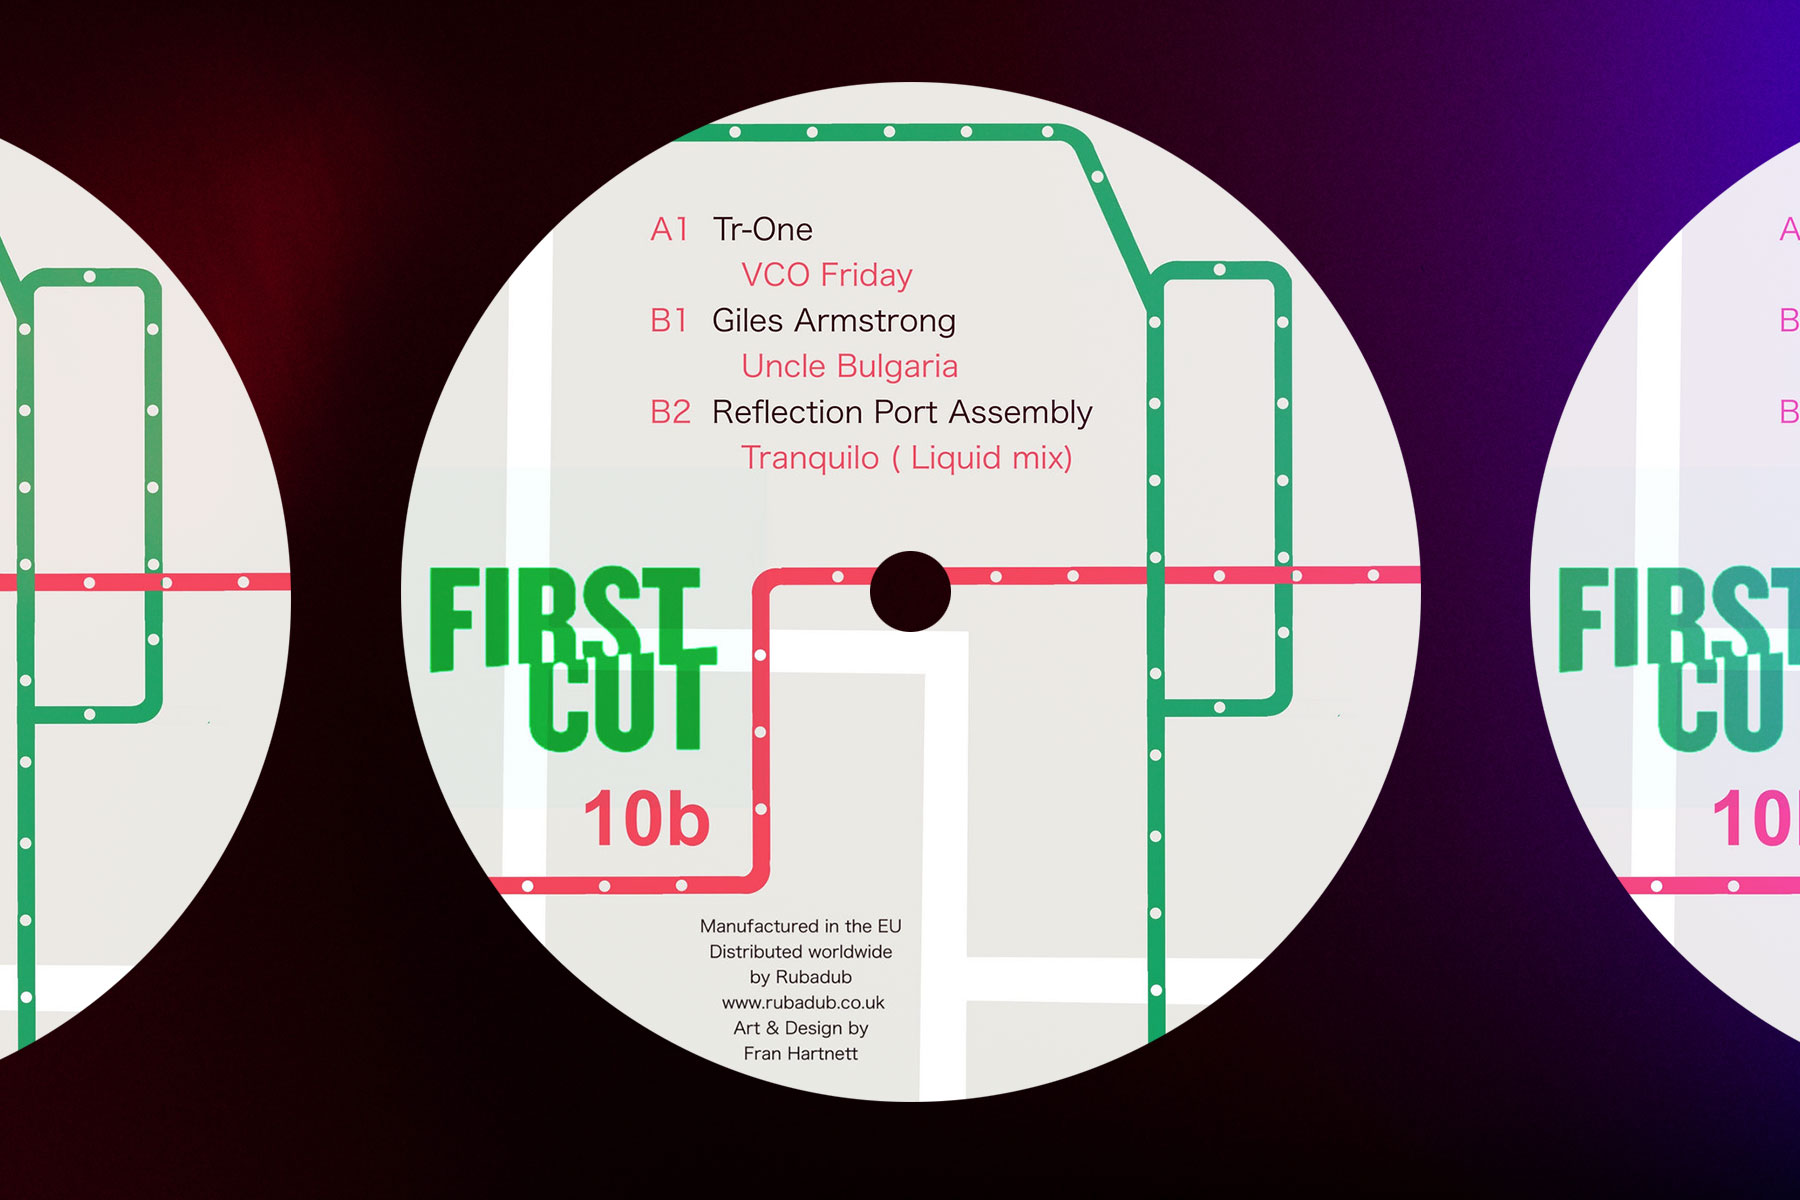 First Cut V/A Crossing the Red Line album art